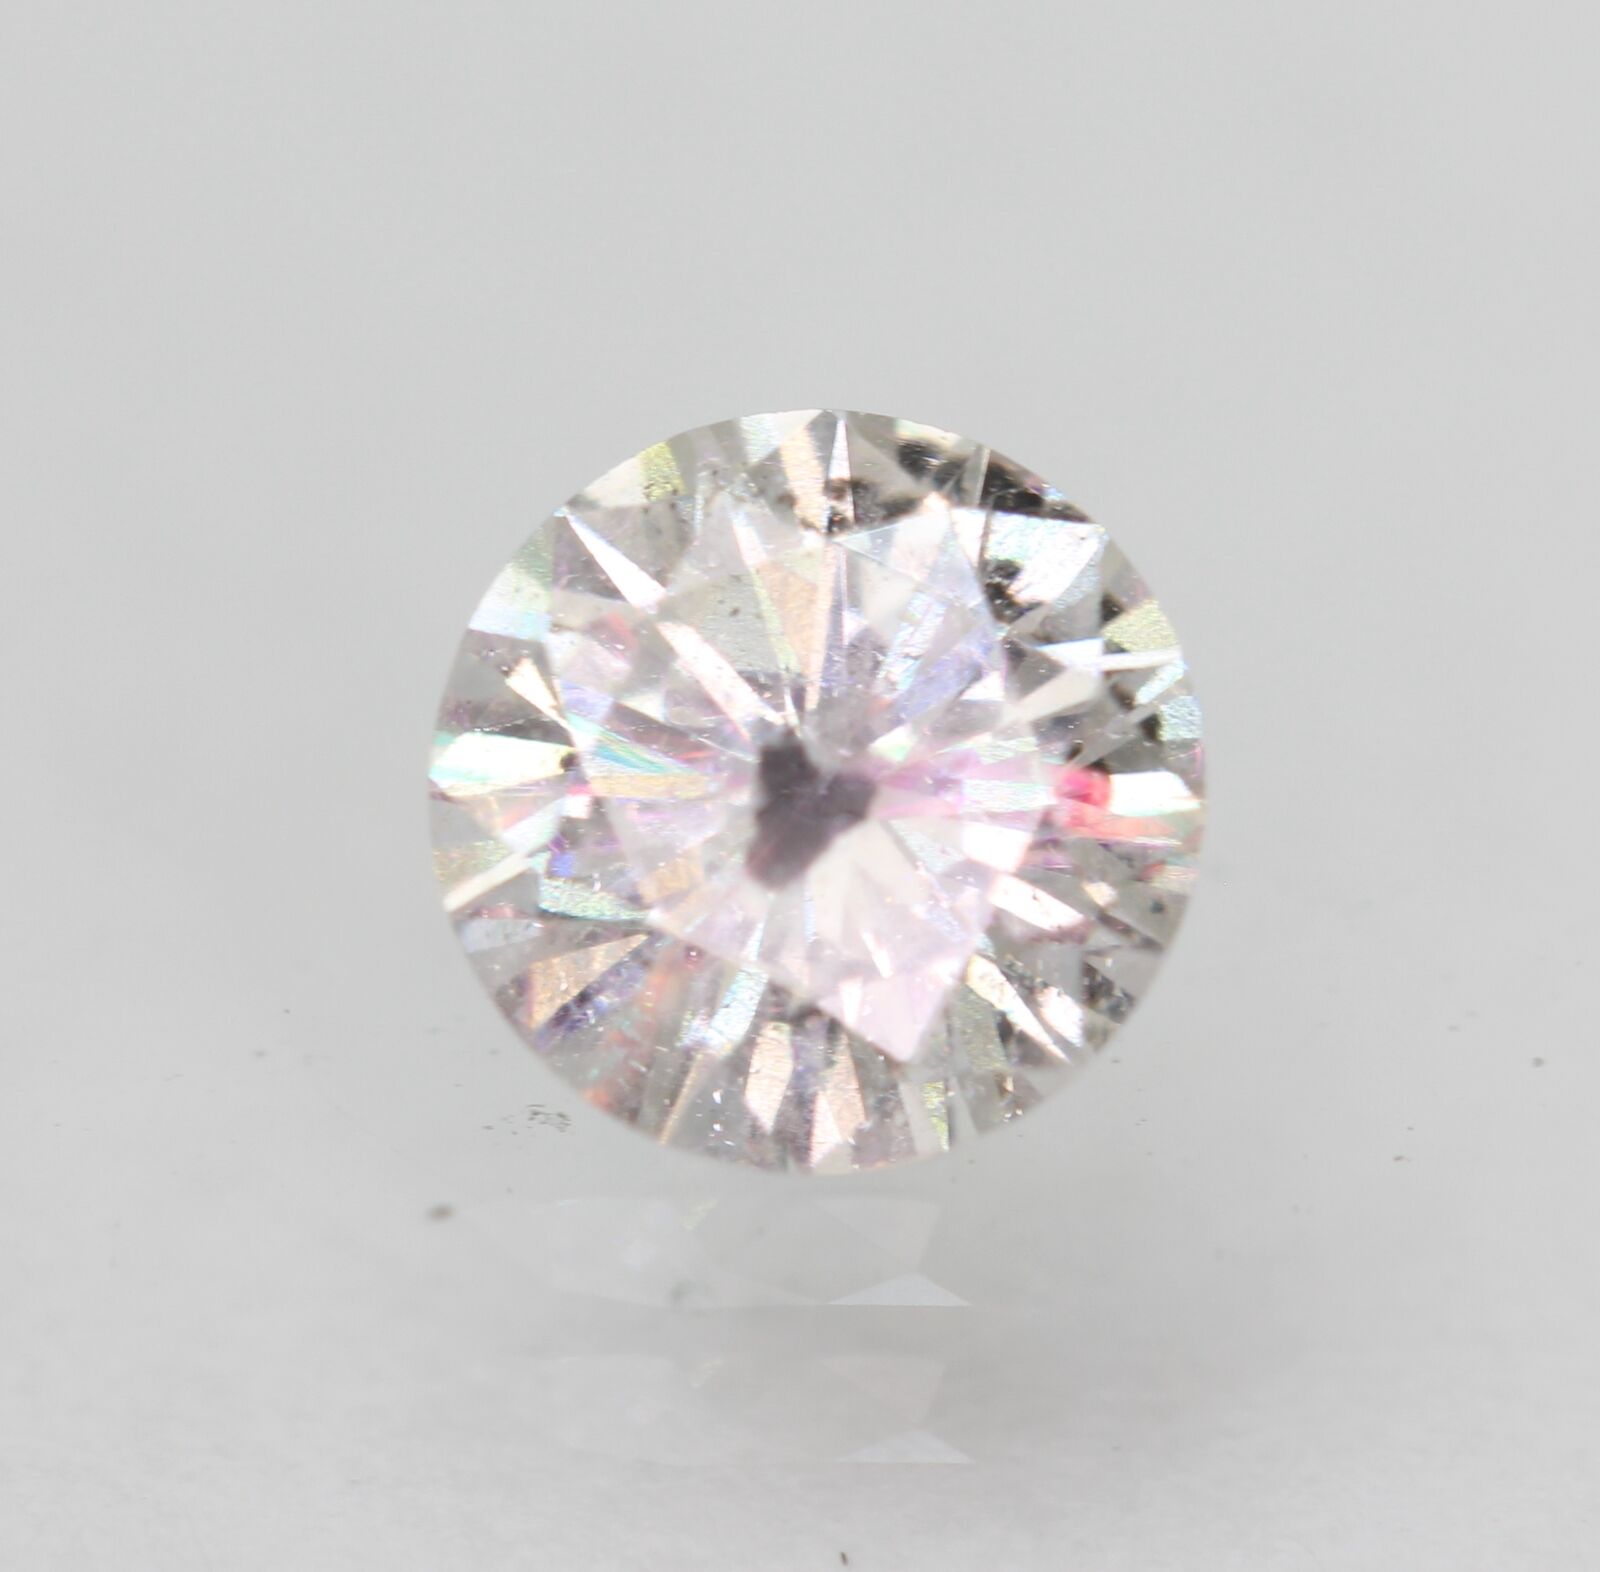 Certified 0.46 Carat G Color Round Brilliant Enhanced Natural Diamond 5.03mm